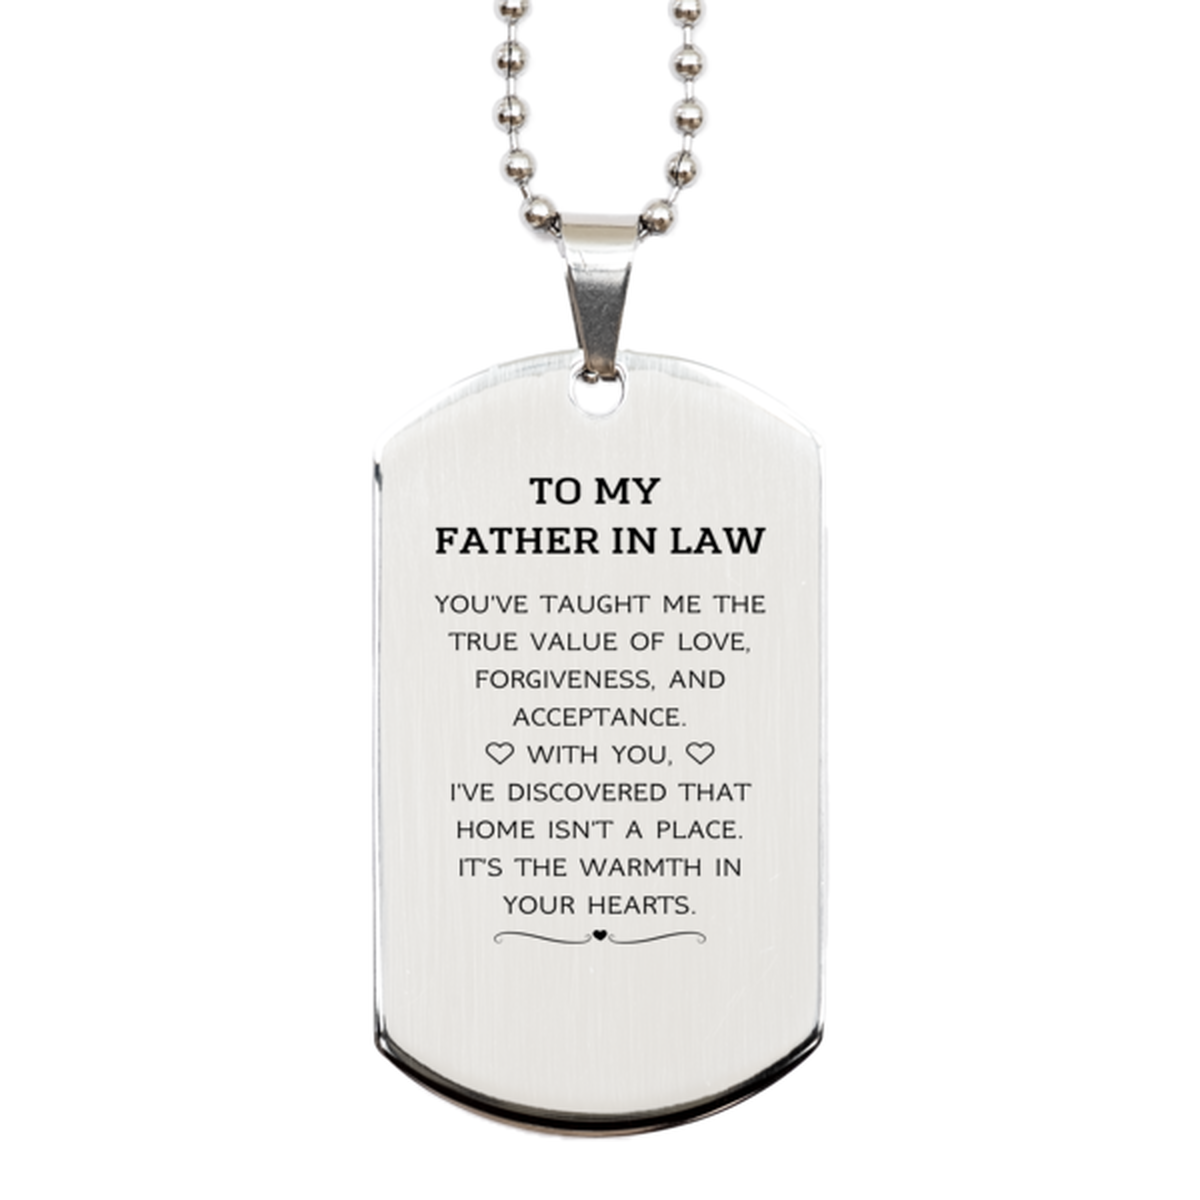 To My Father In Law Gifts, You've taught me the true value of love, Thank You Gifts For Father In Law, Birthday Silver Dog Tag For Father In Law